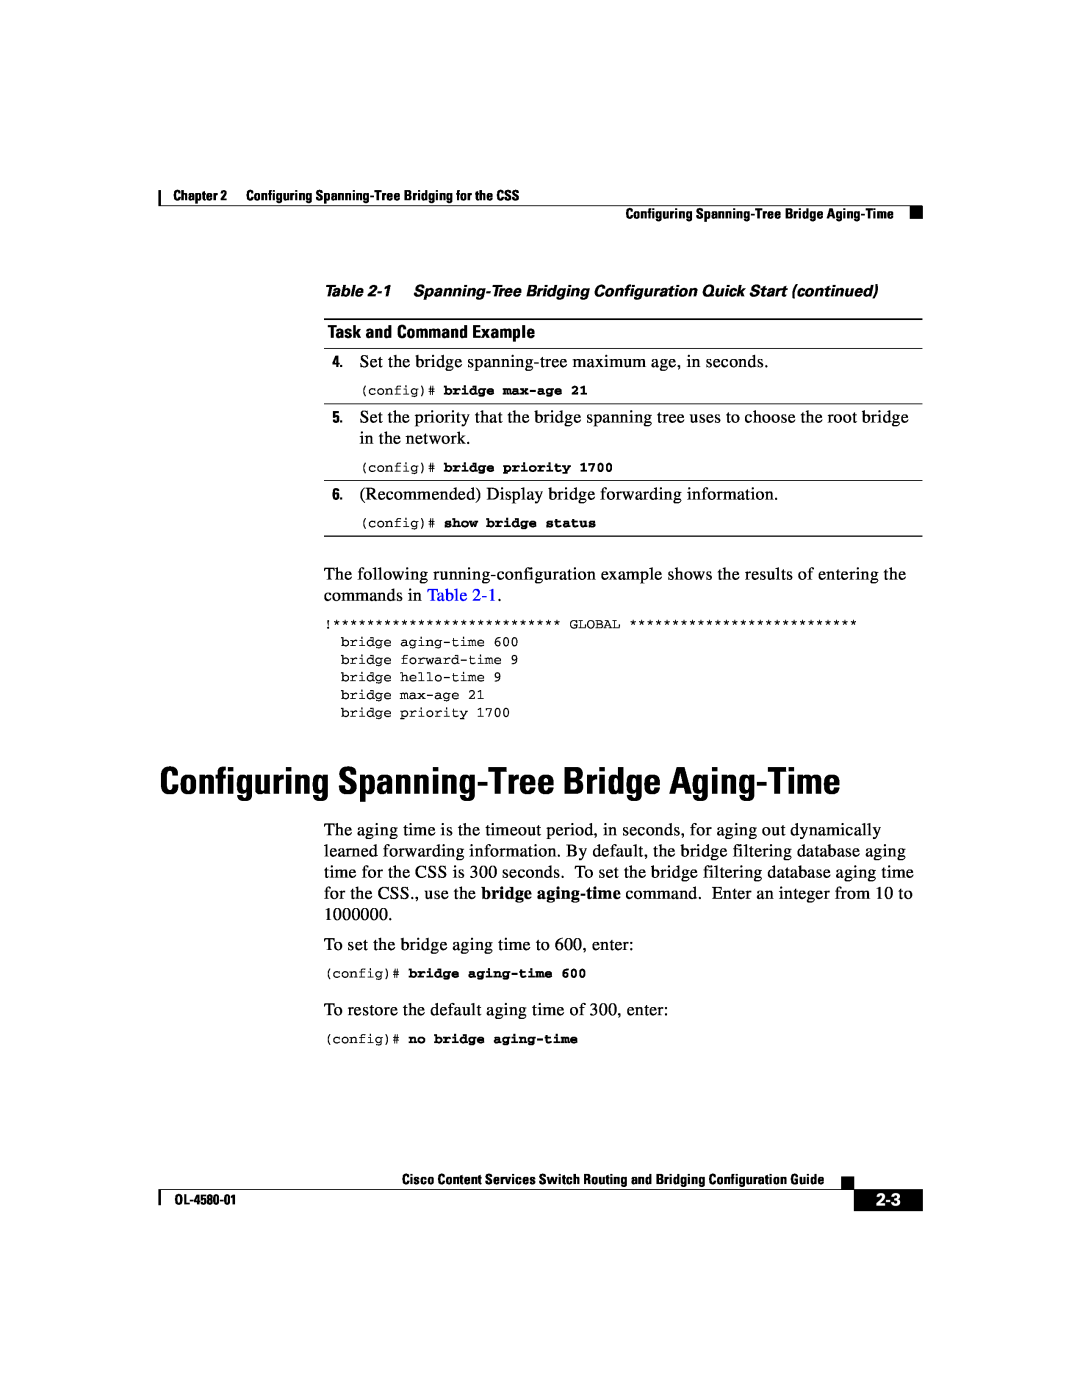 Cisco Systems OL-4580-01 manual Configuring Spanning-Tree Bridge Aging-Time, Task and Command Example 